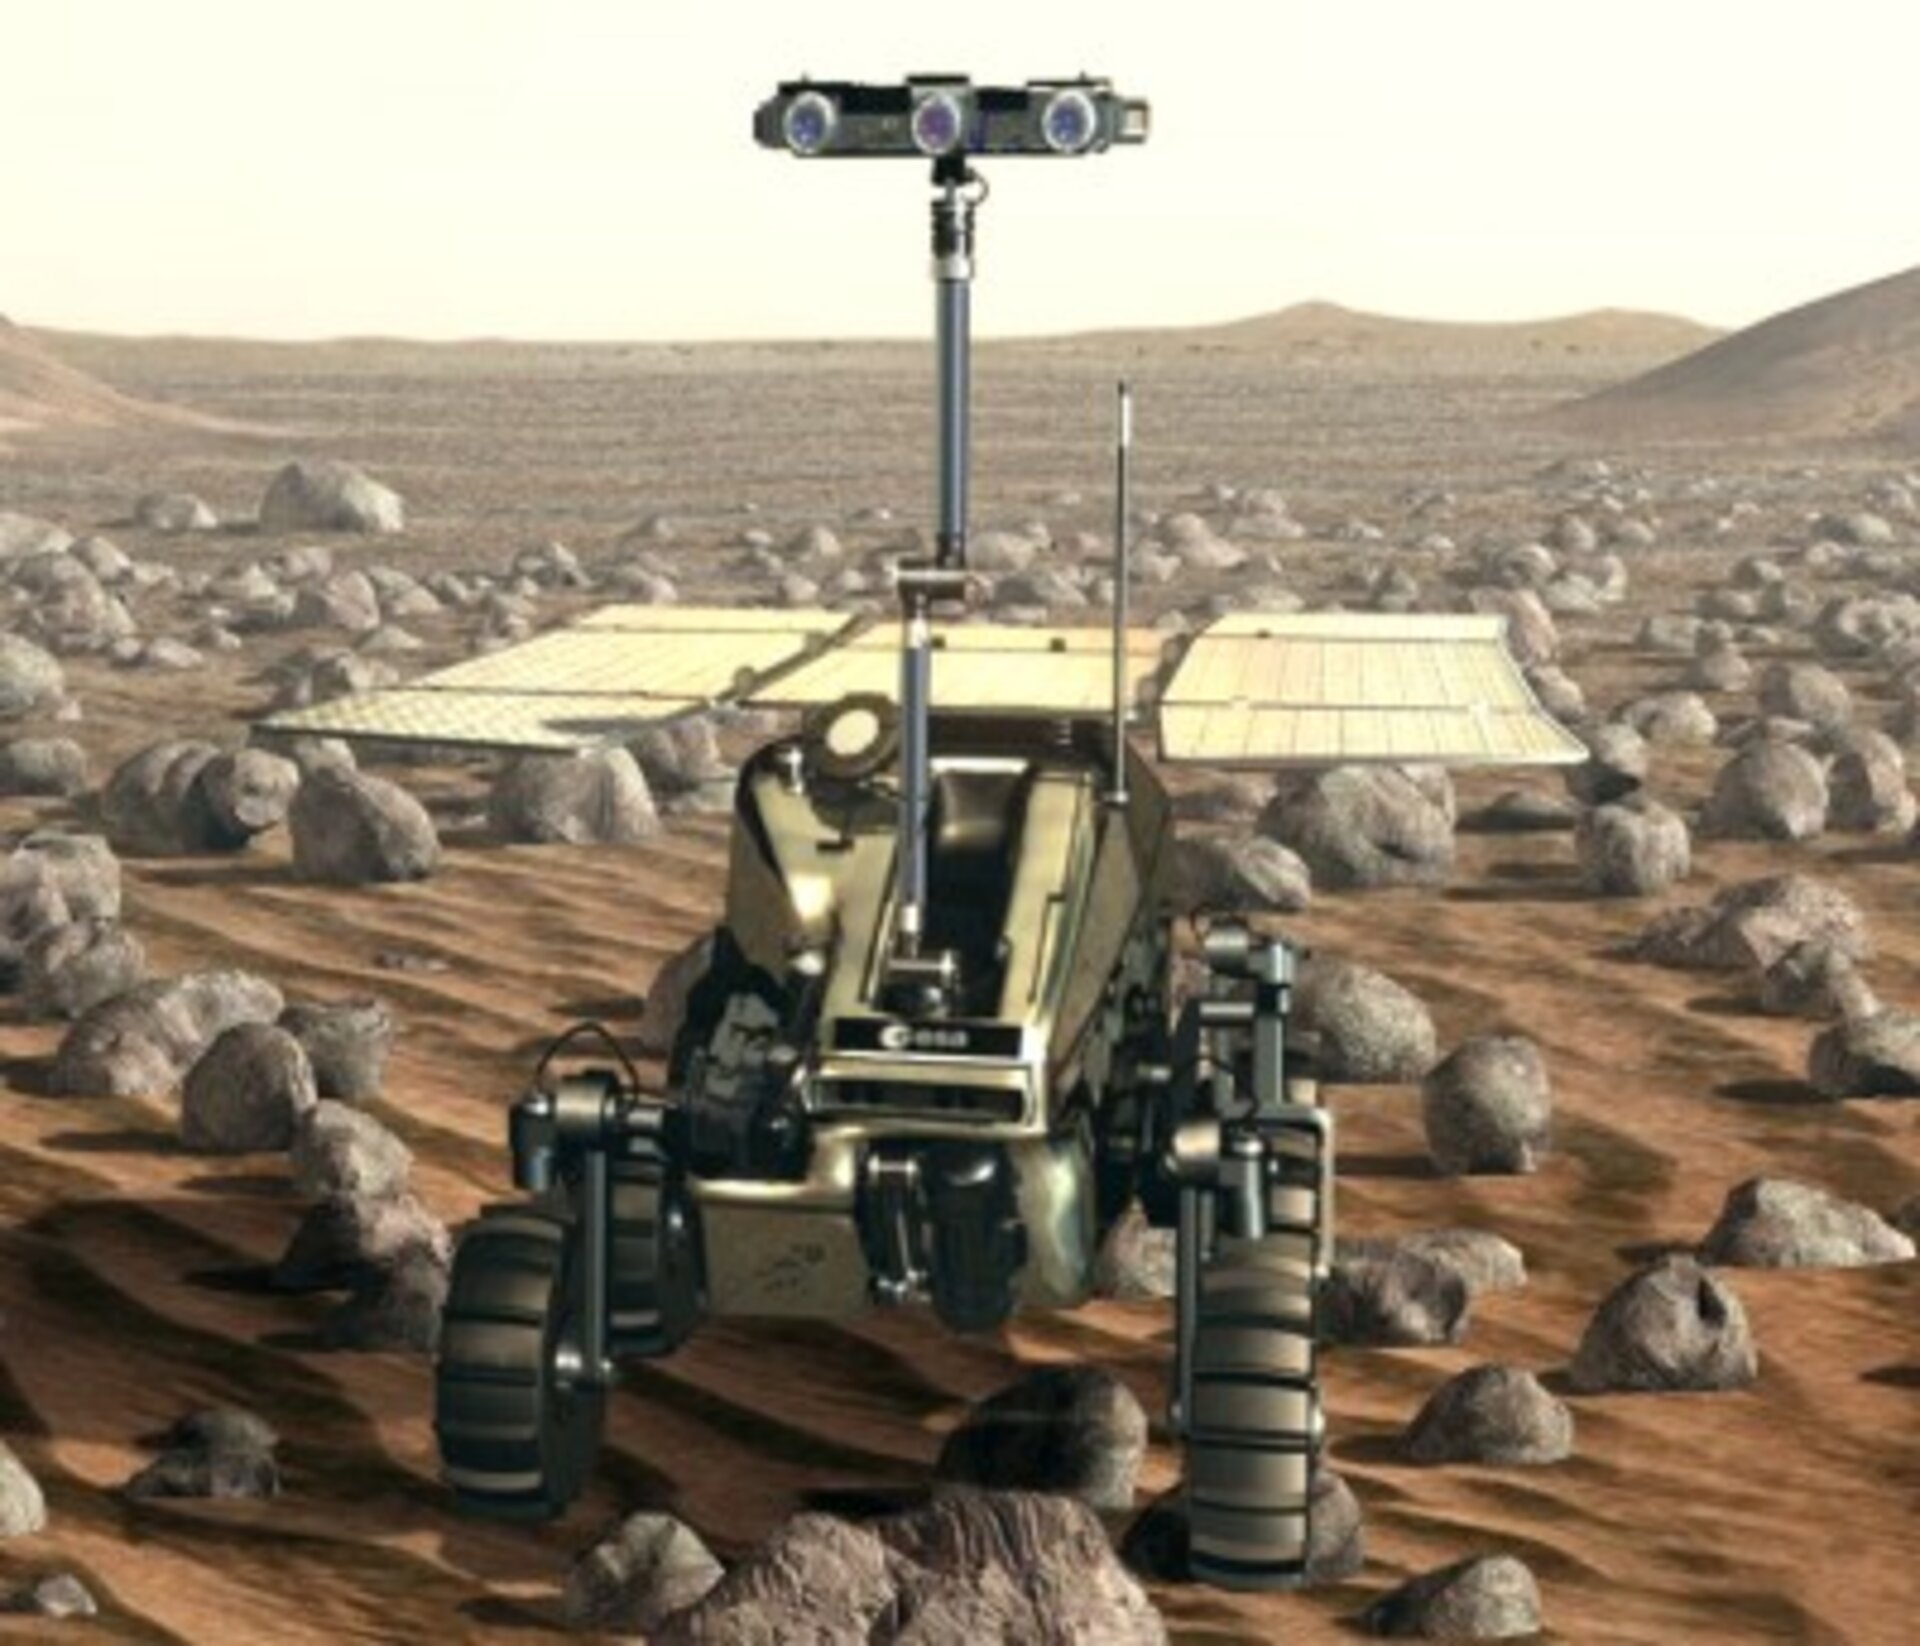 ExoMars is the first robotic mission to be developed within the Aurora programme framework